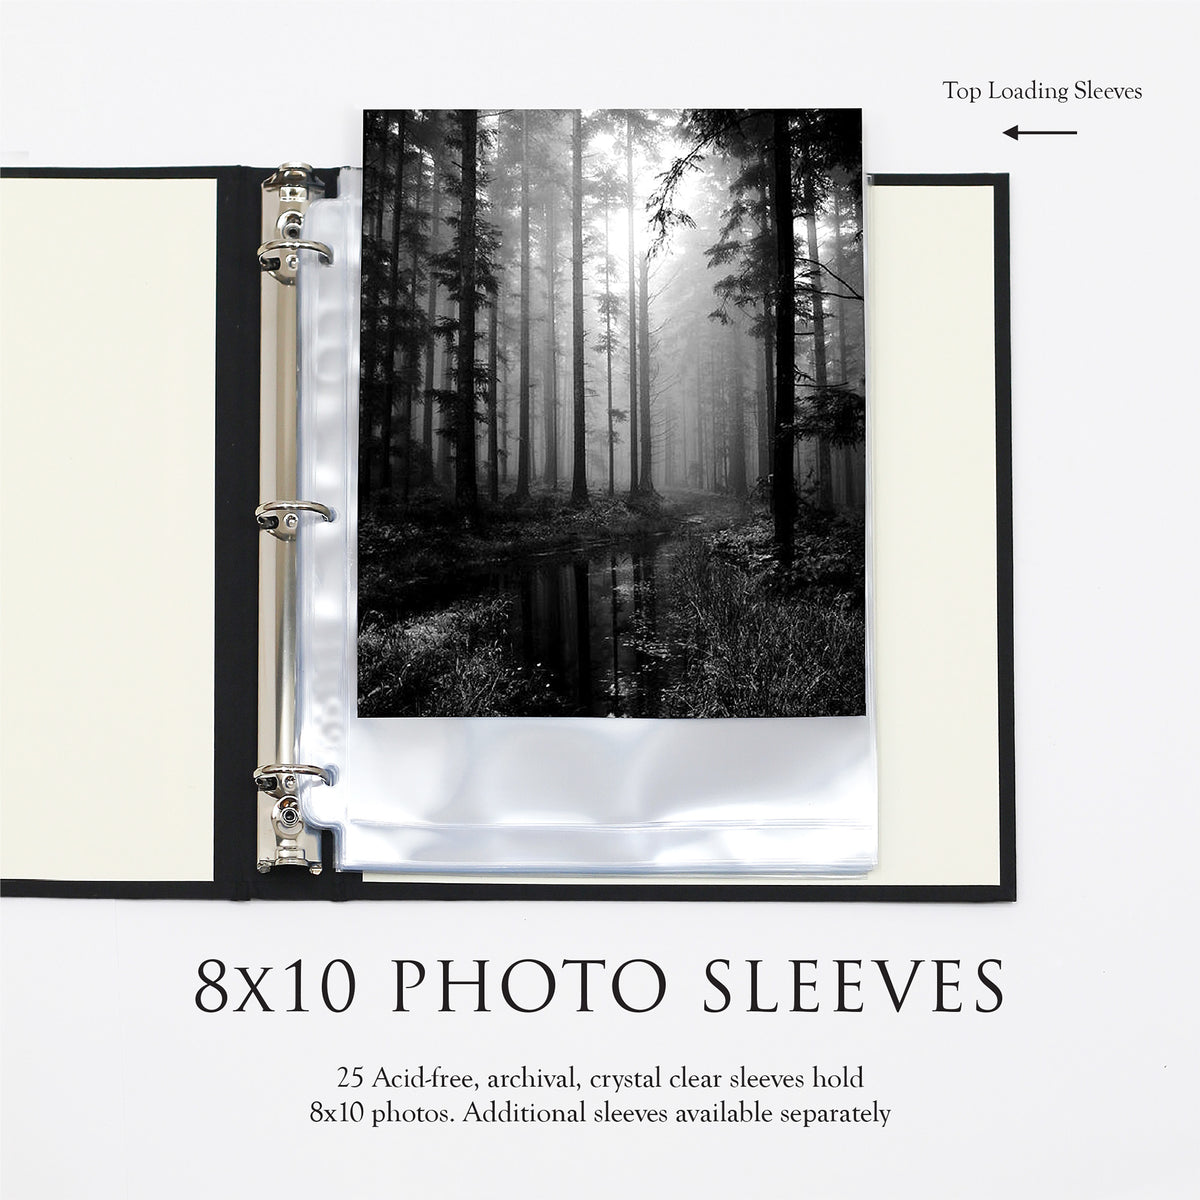 Large Photo Binder For 8x10 Photos | Cover: Natural Linen | Available Personalized